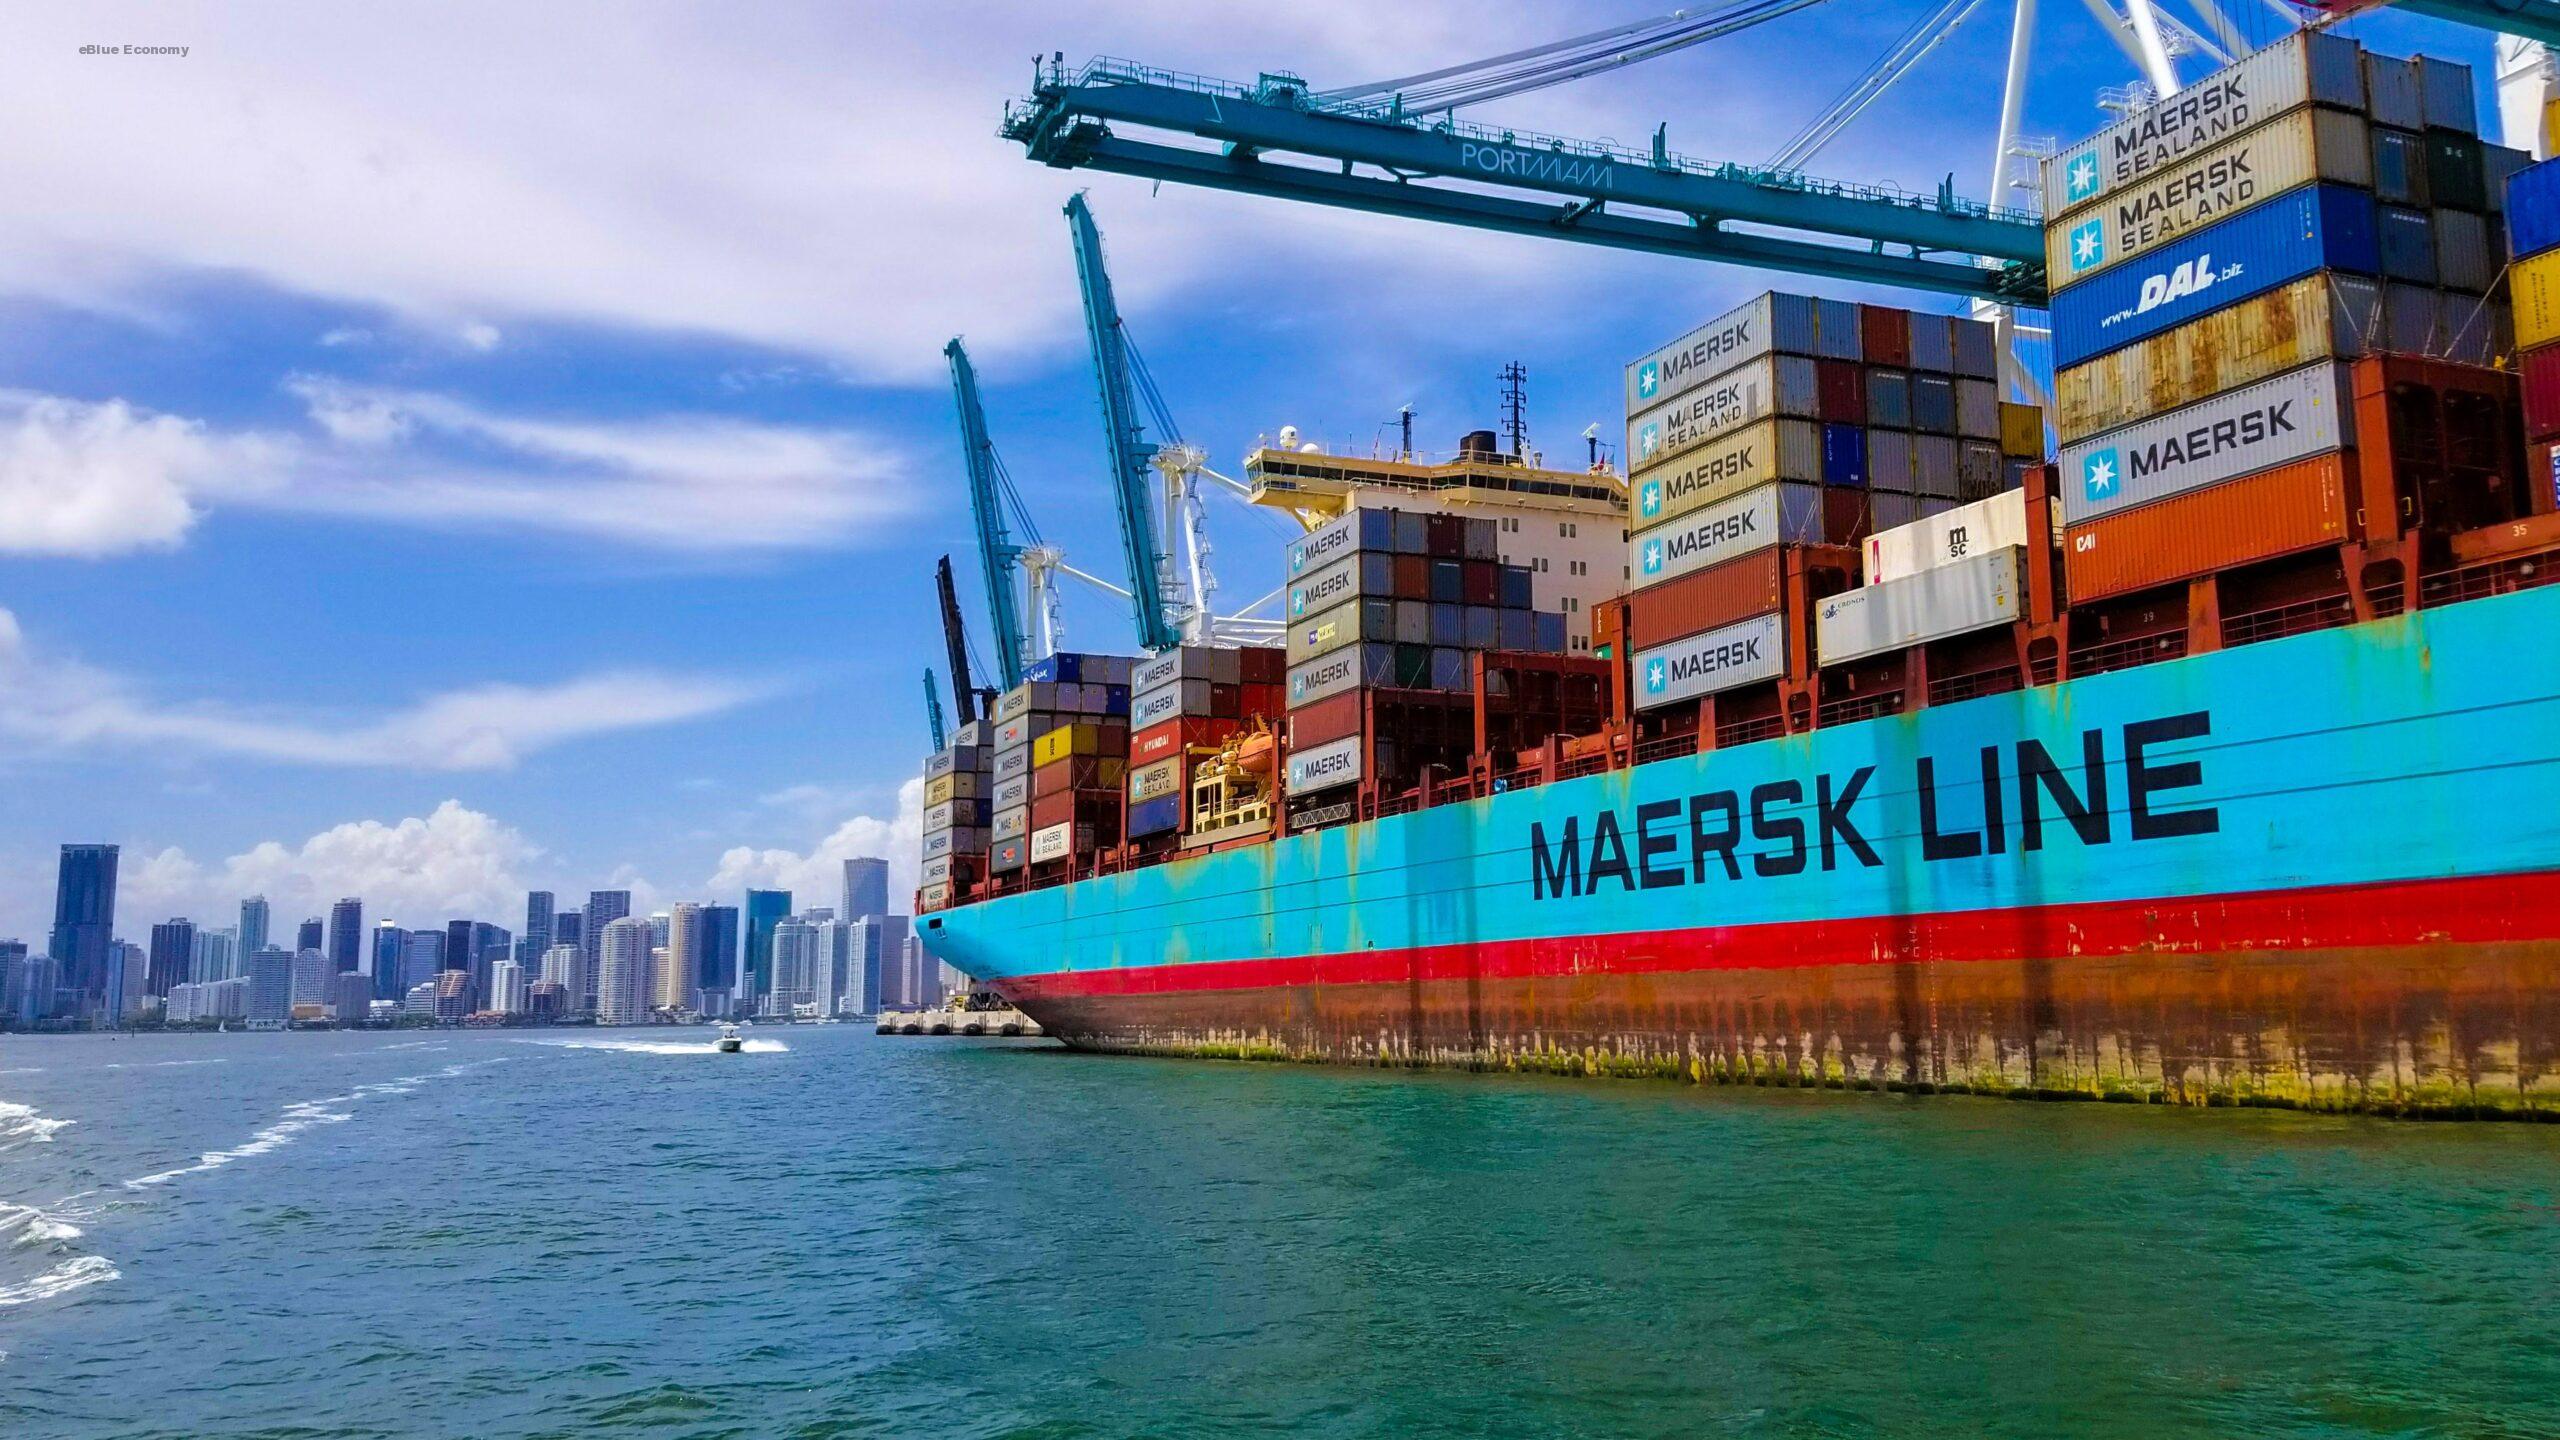 eBlue_economy_Maersk to redesign its ocean network in West & Central Asia.webp 22